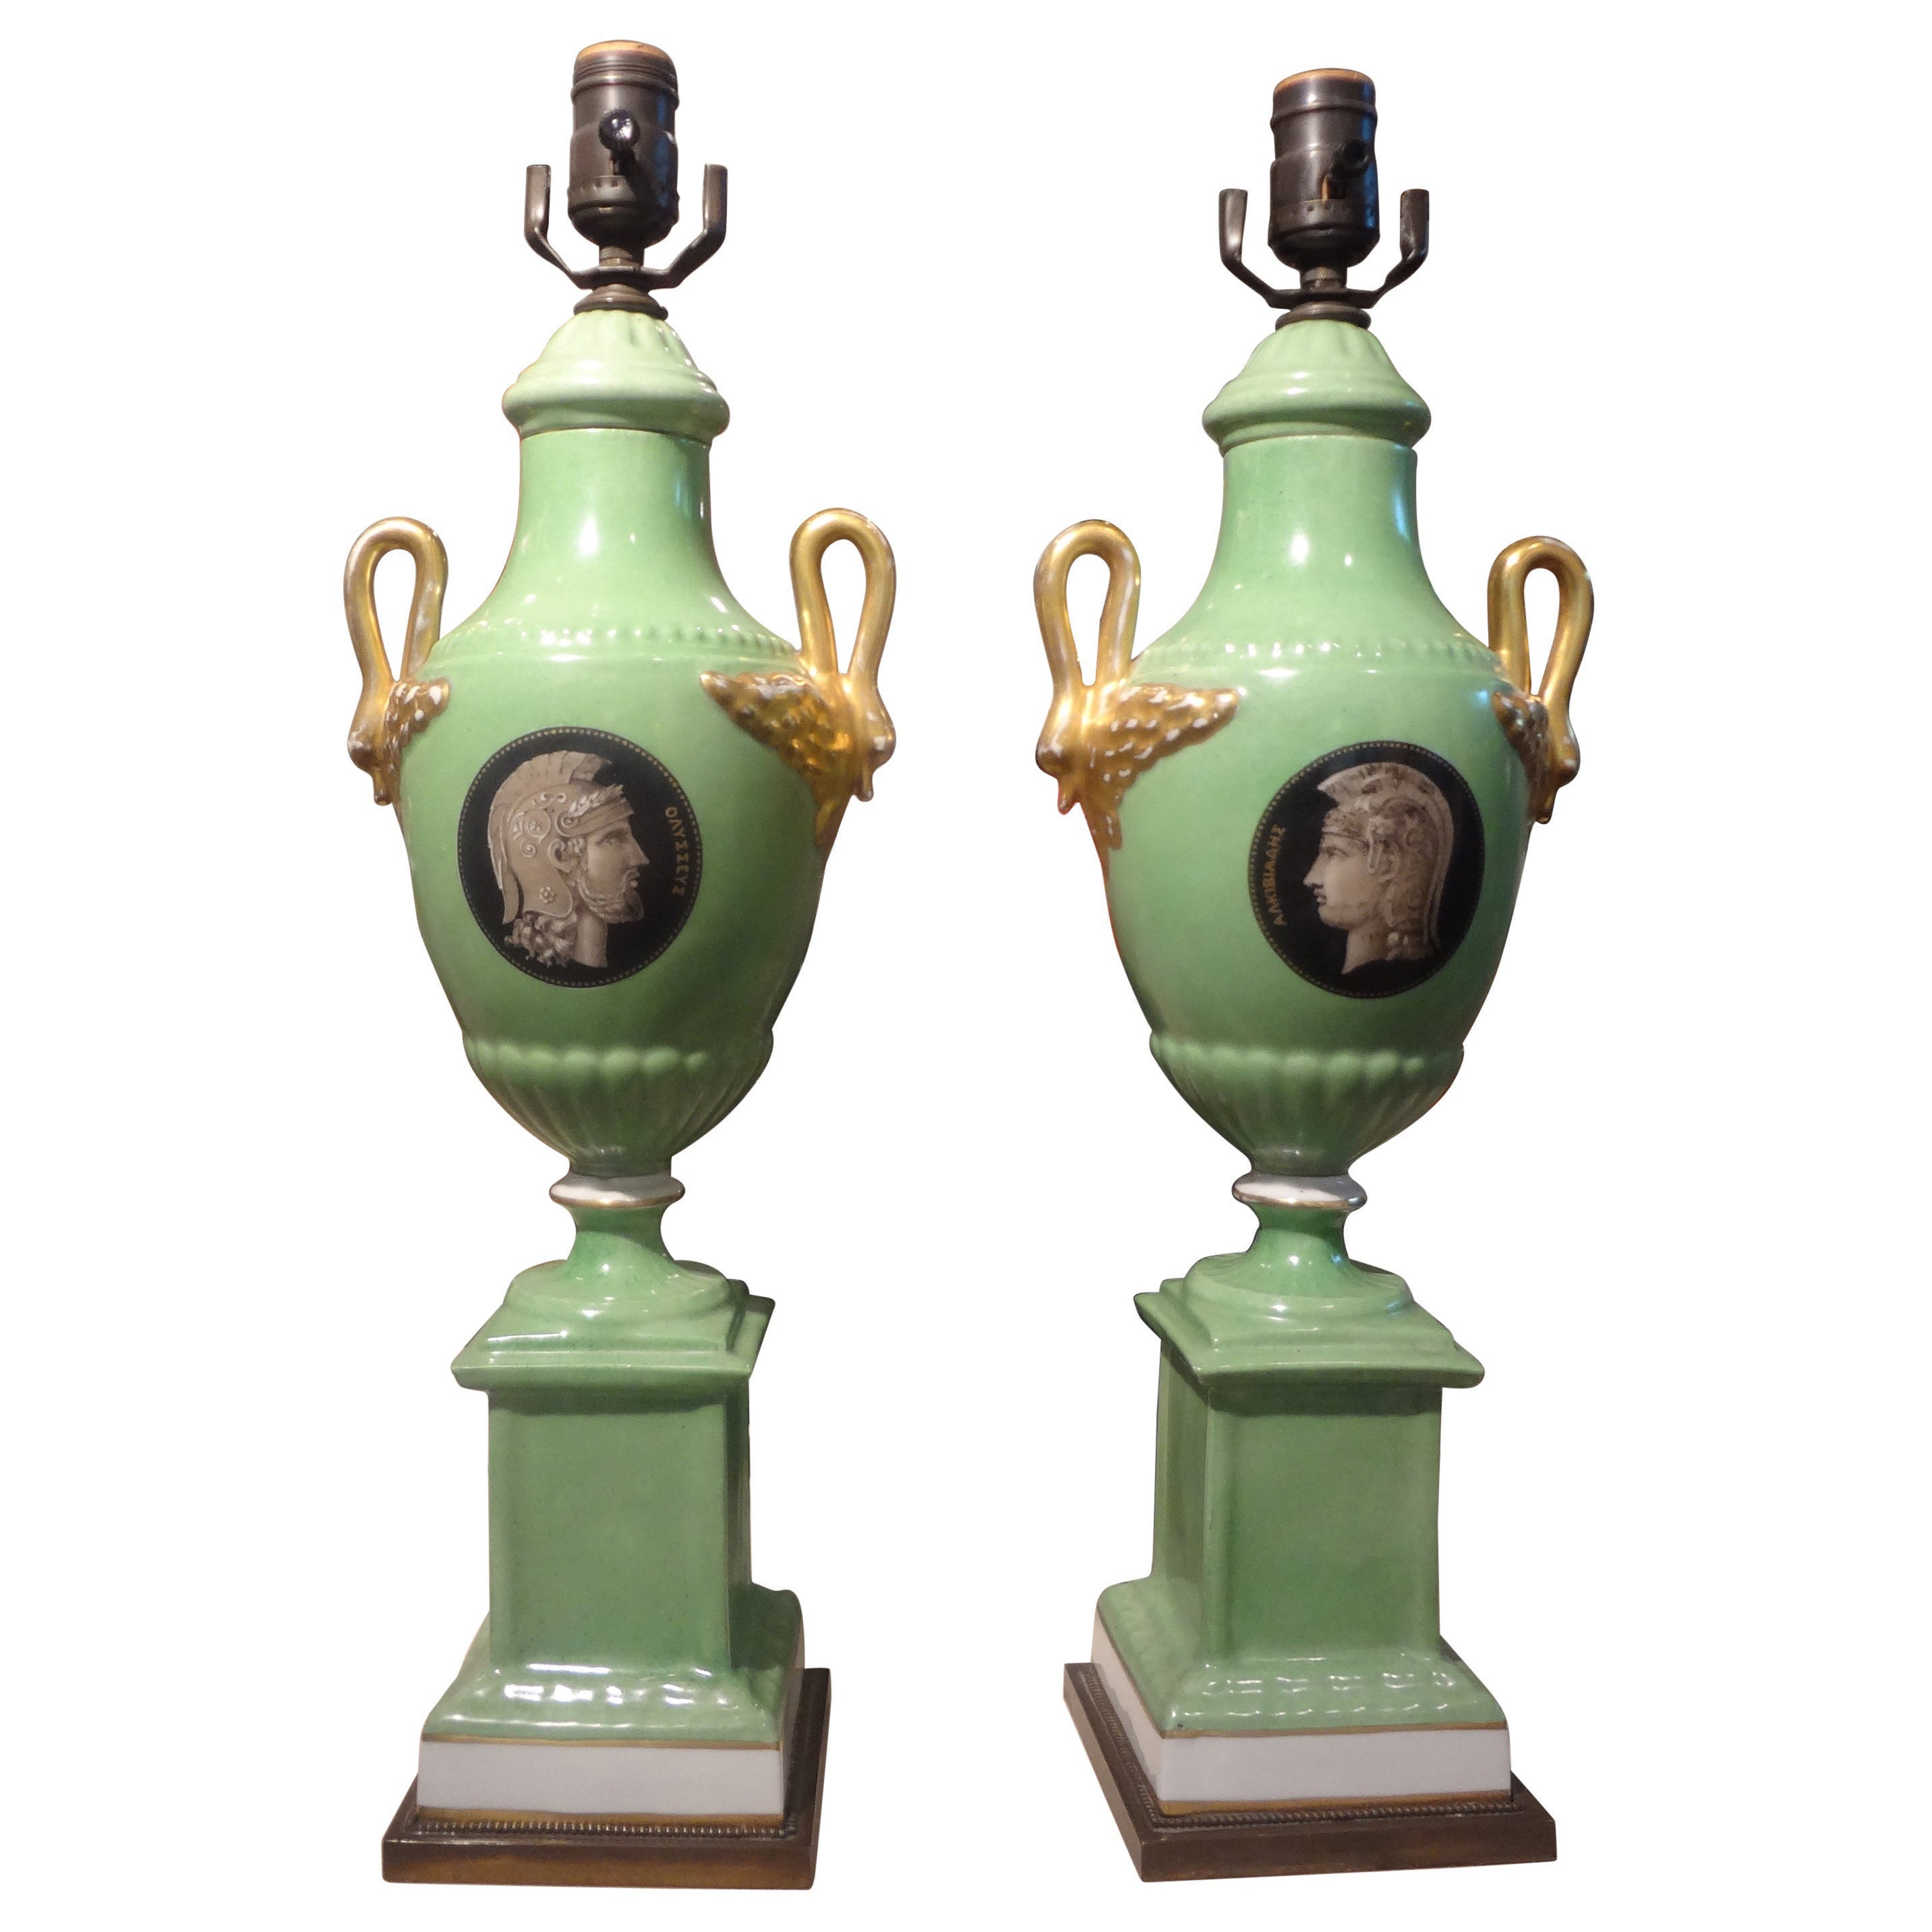 Pair of Italian Neoclassical Style Porcelain Lamps